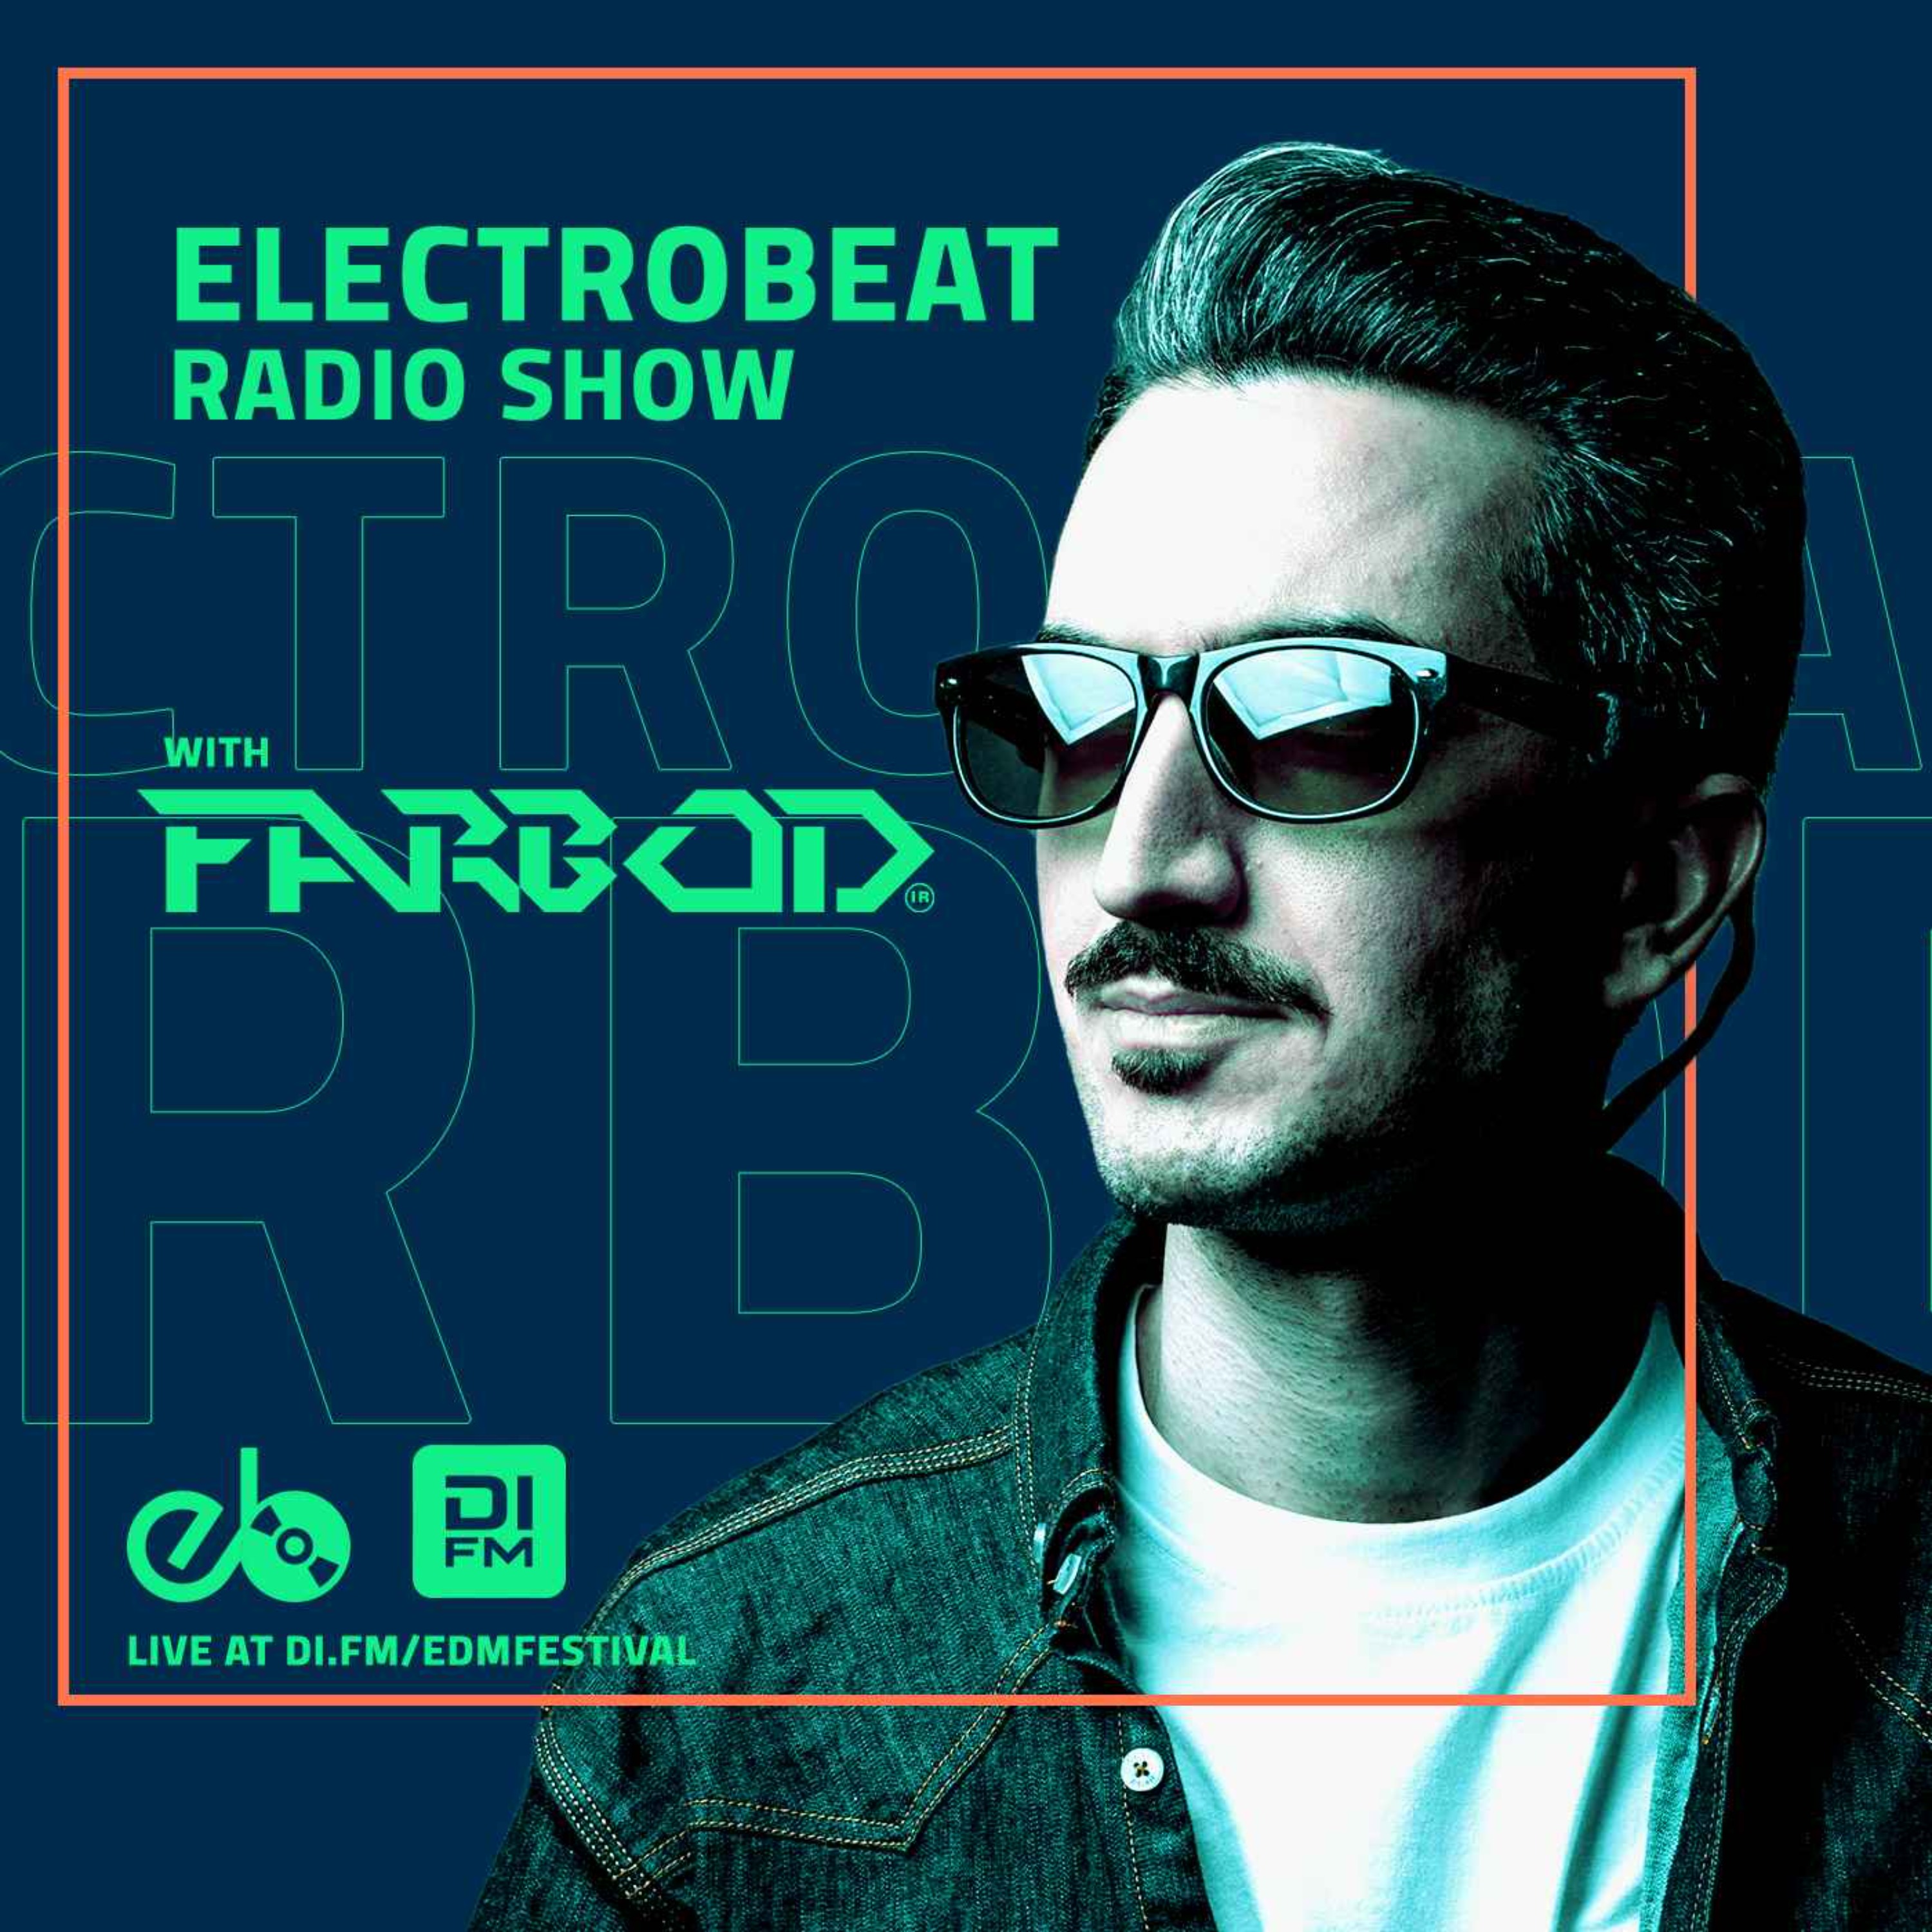 Electro BEAT Radio Show with Farbod